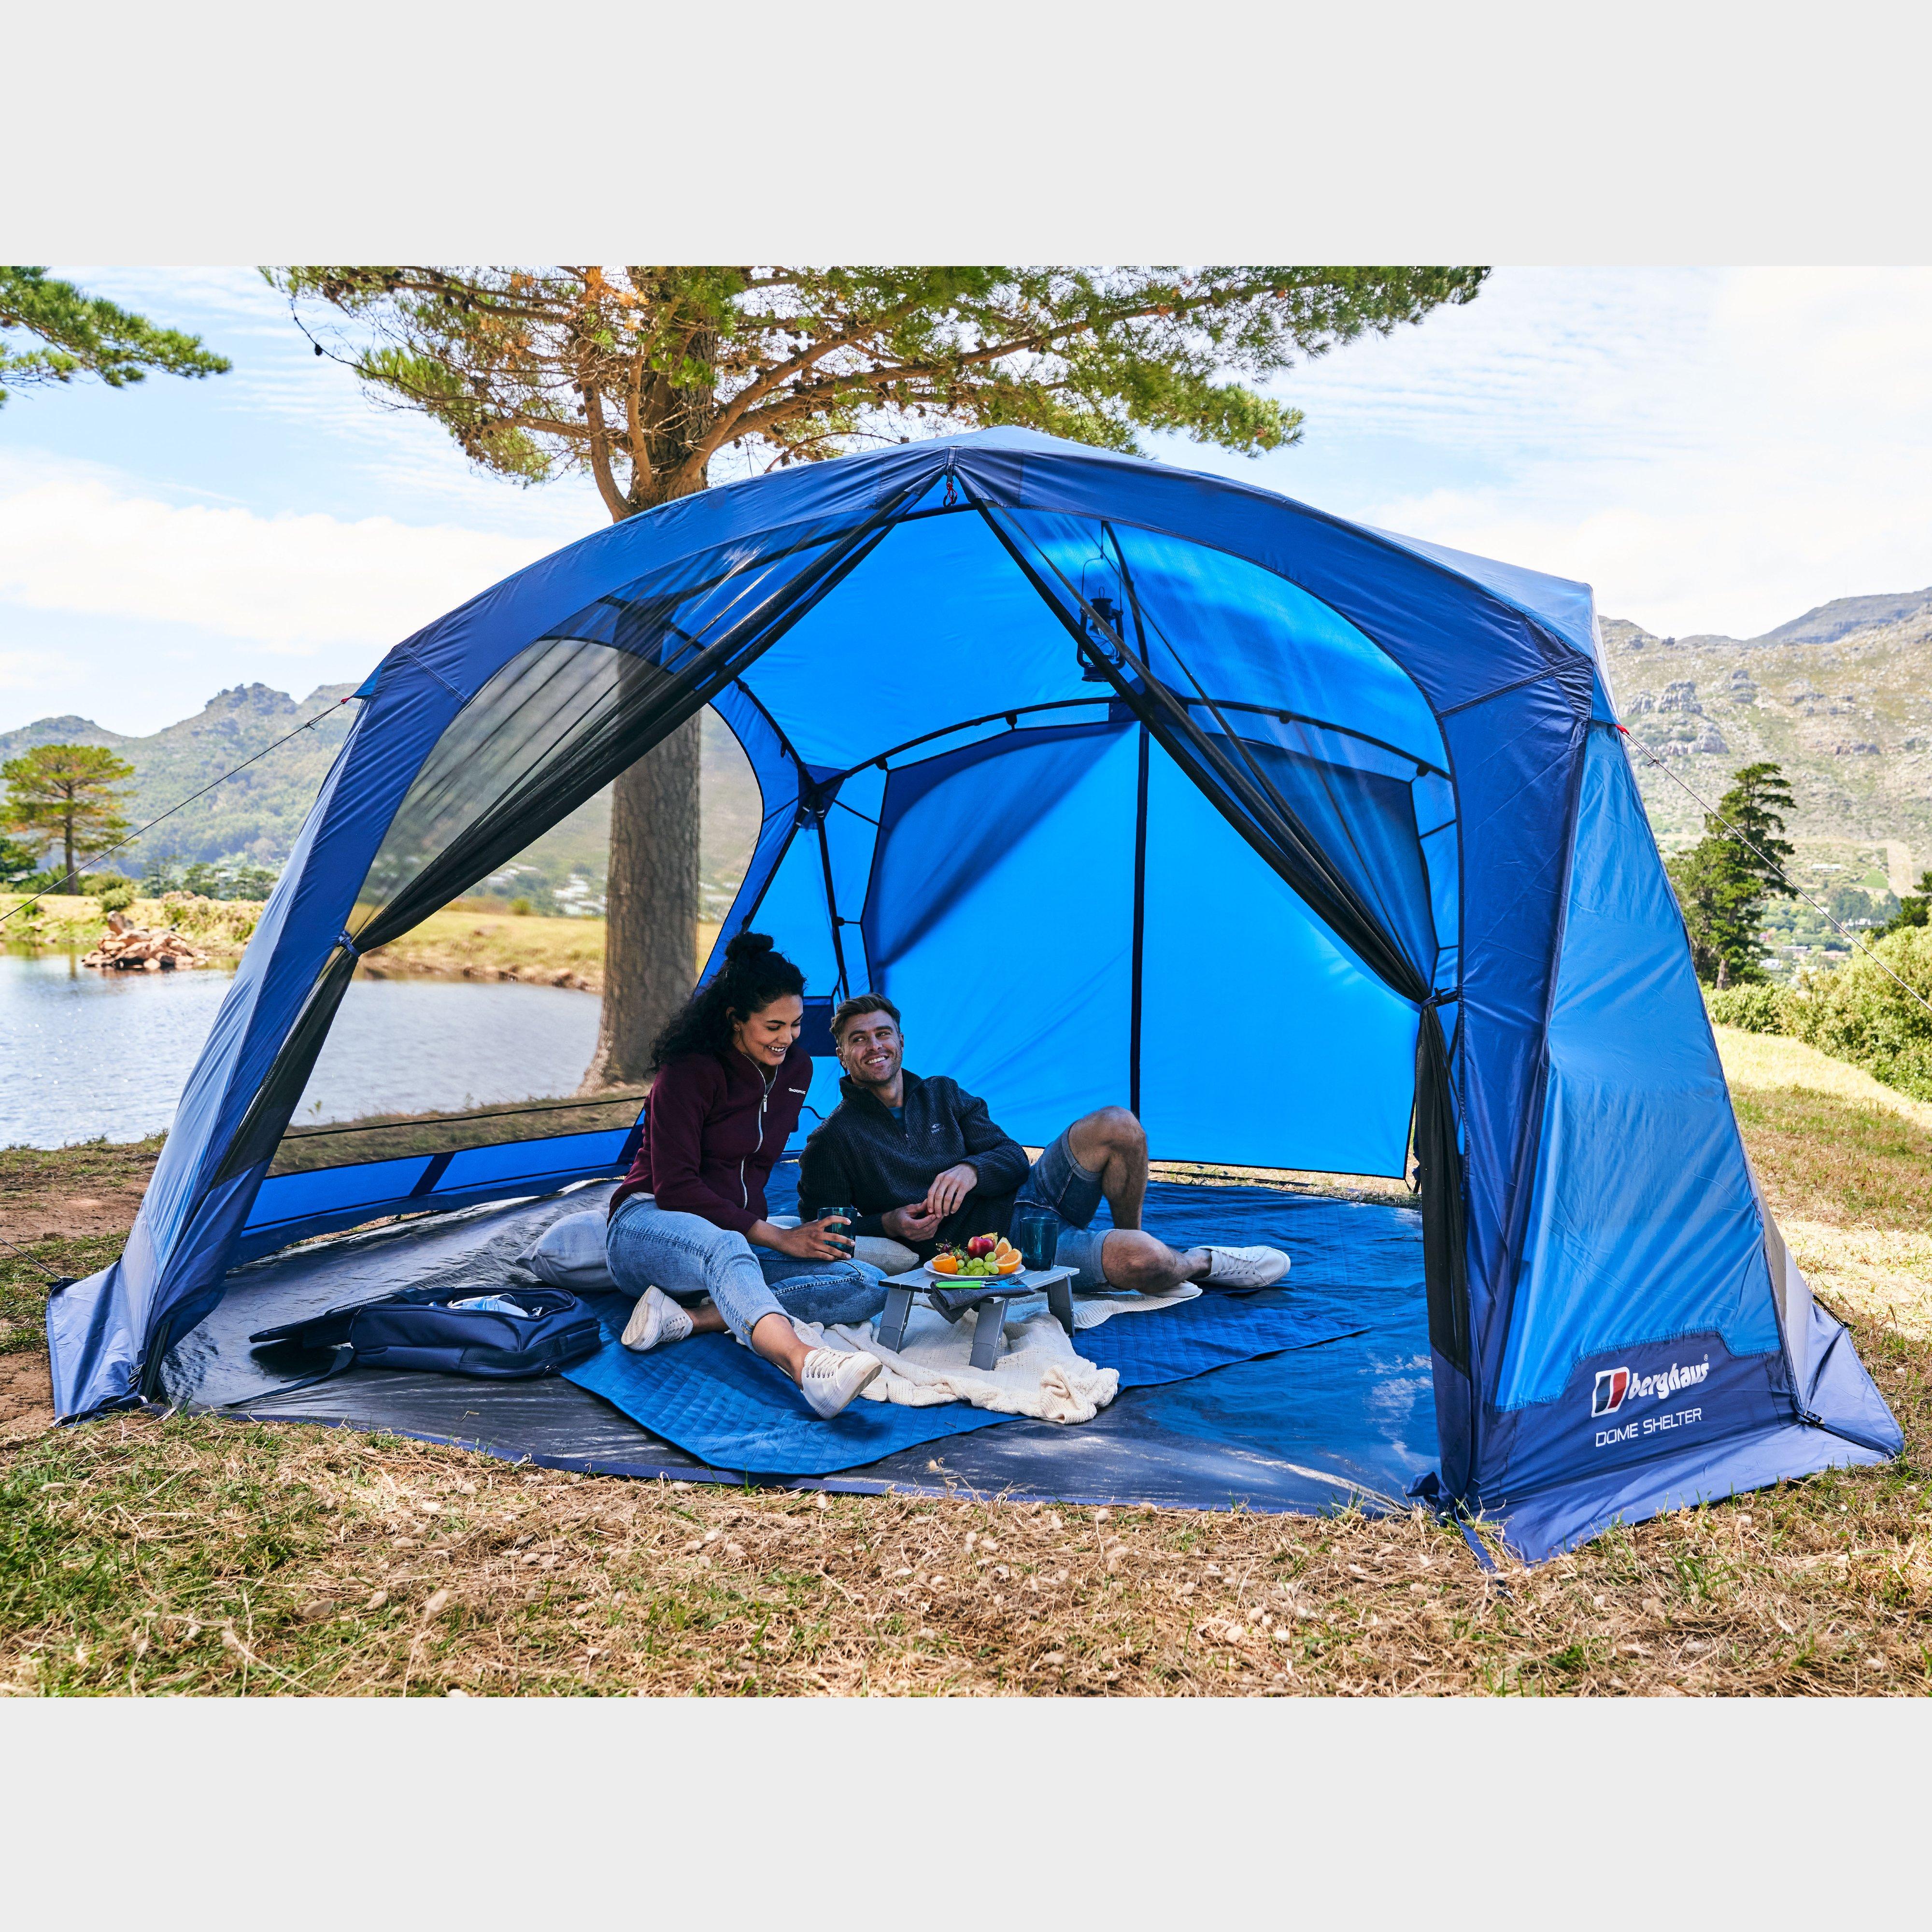 Berghaus Dome Shelter Accessories - Blue, Blue